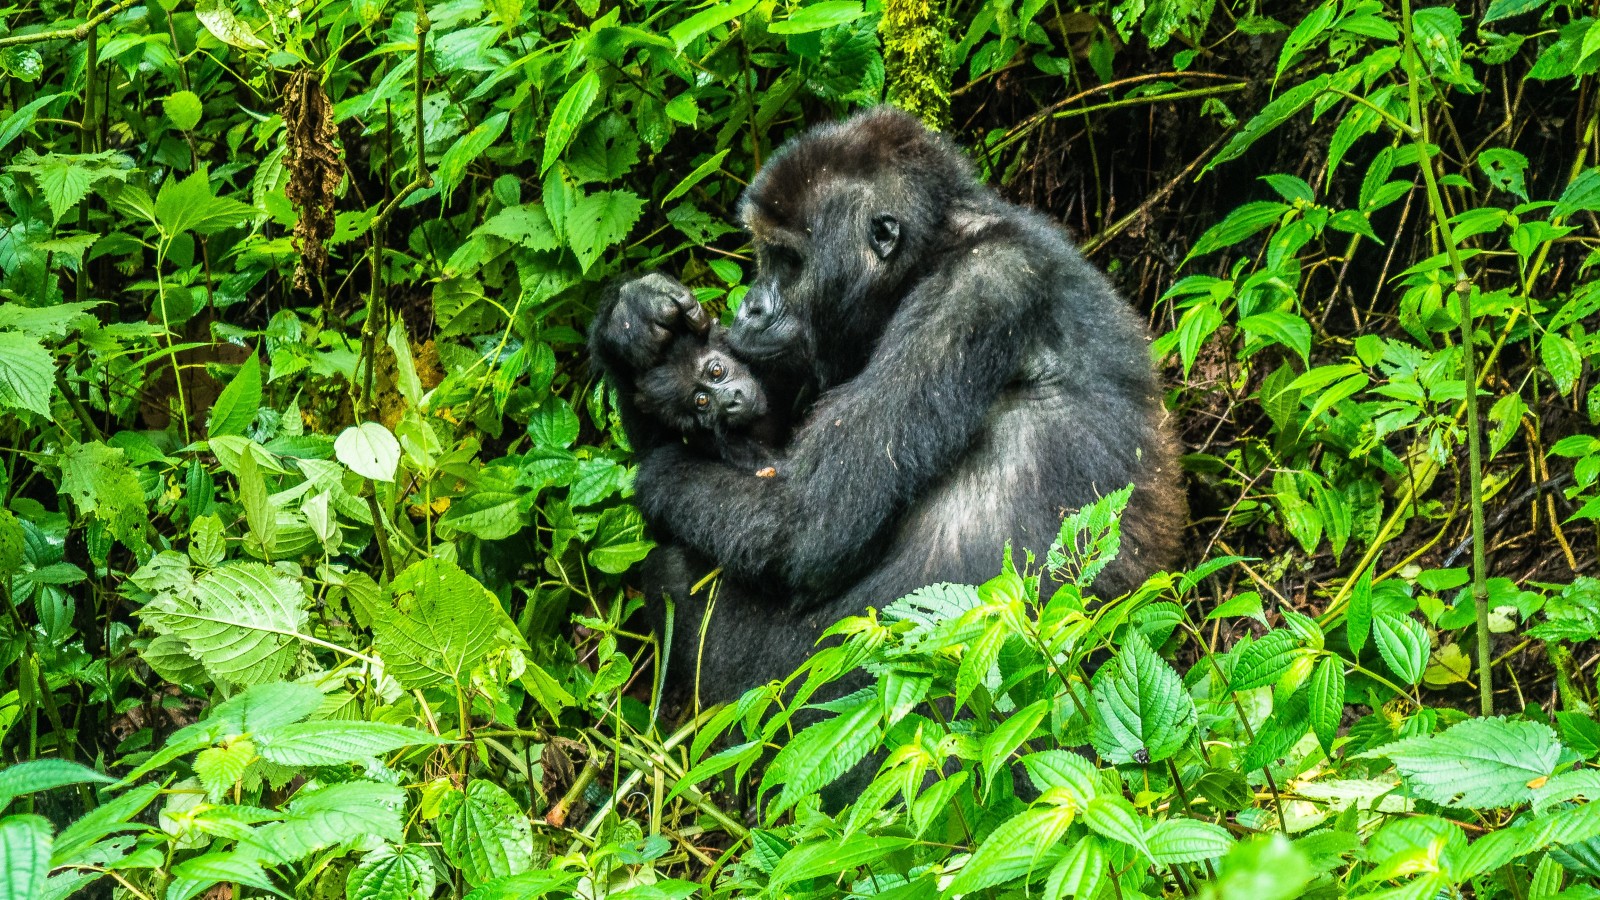 Two gorillas cleaning each other surrounded by green plants